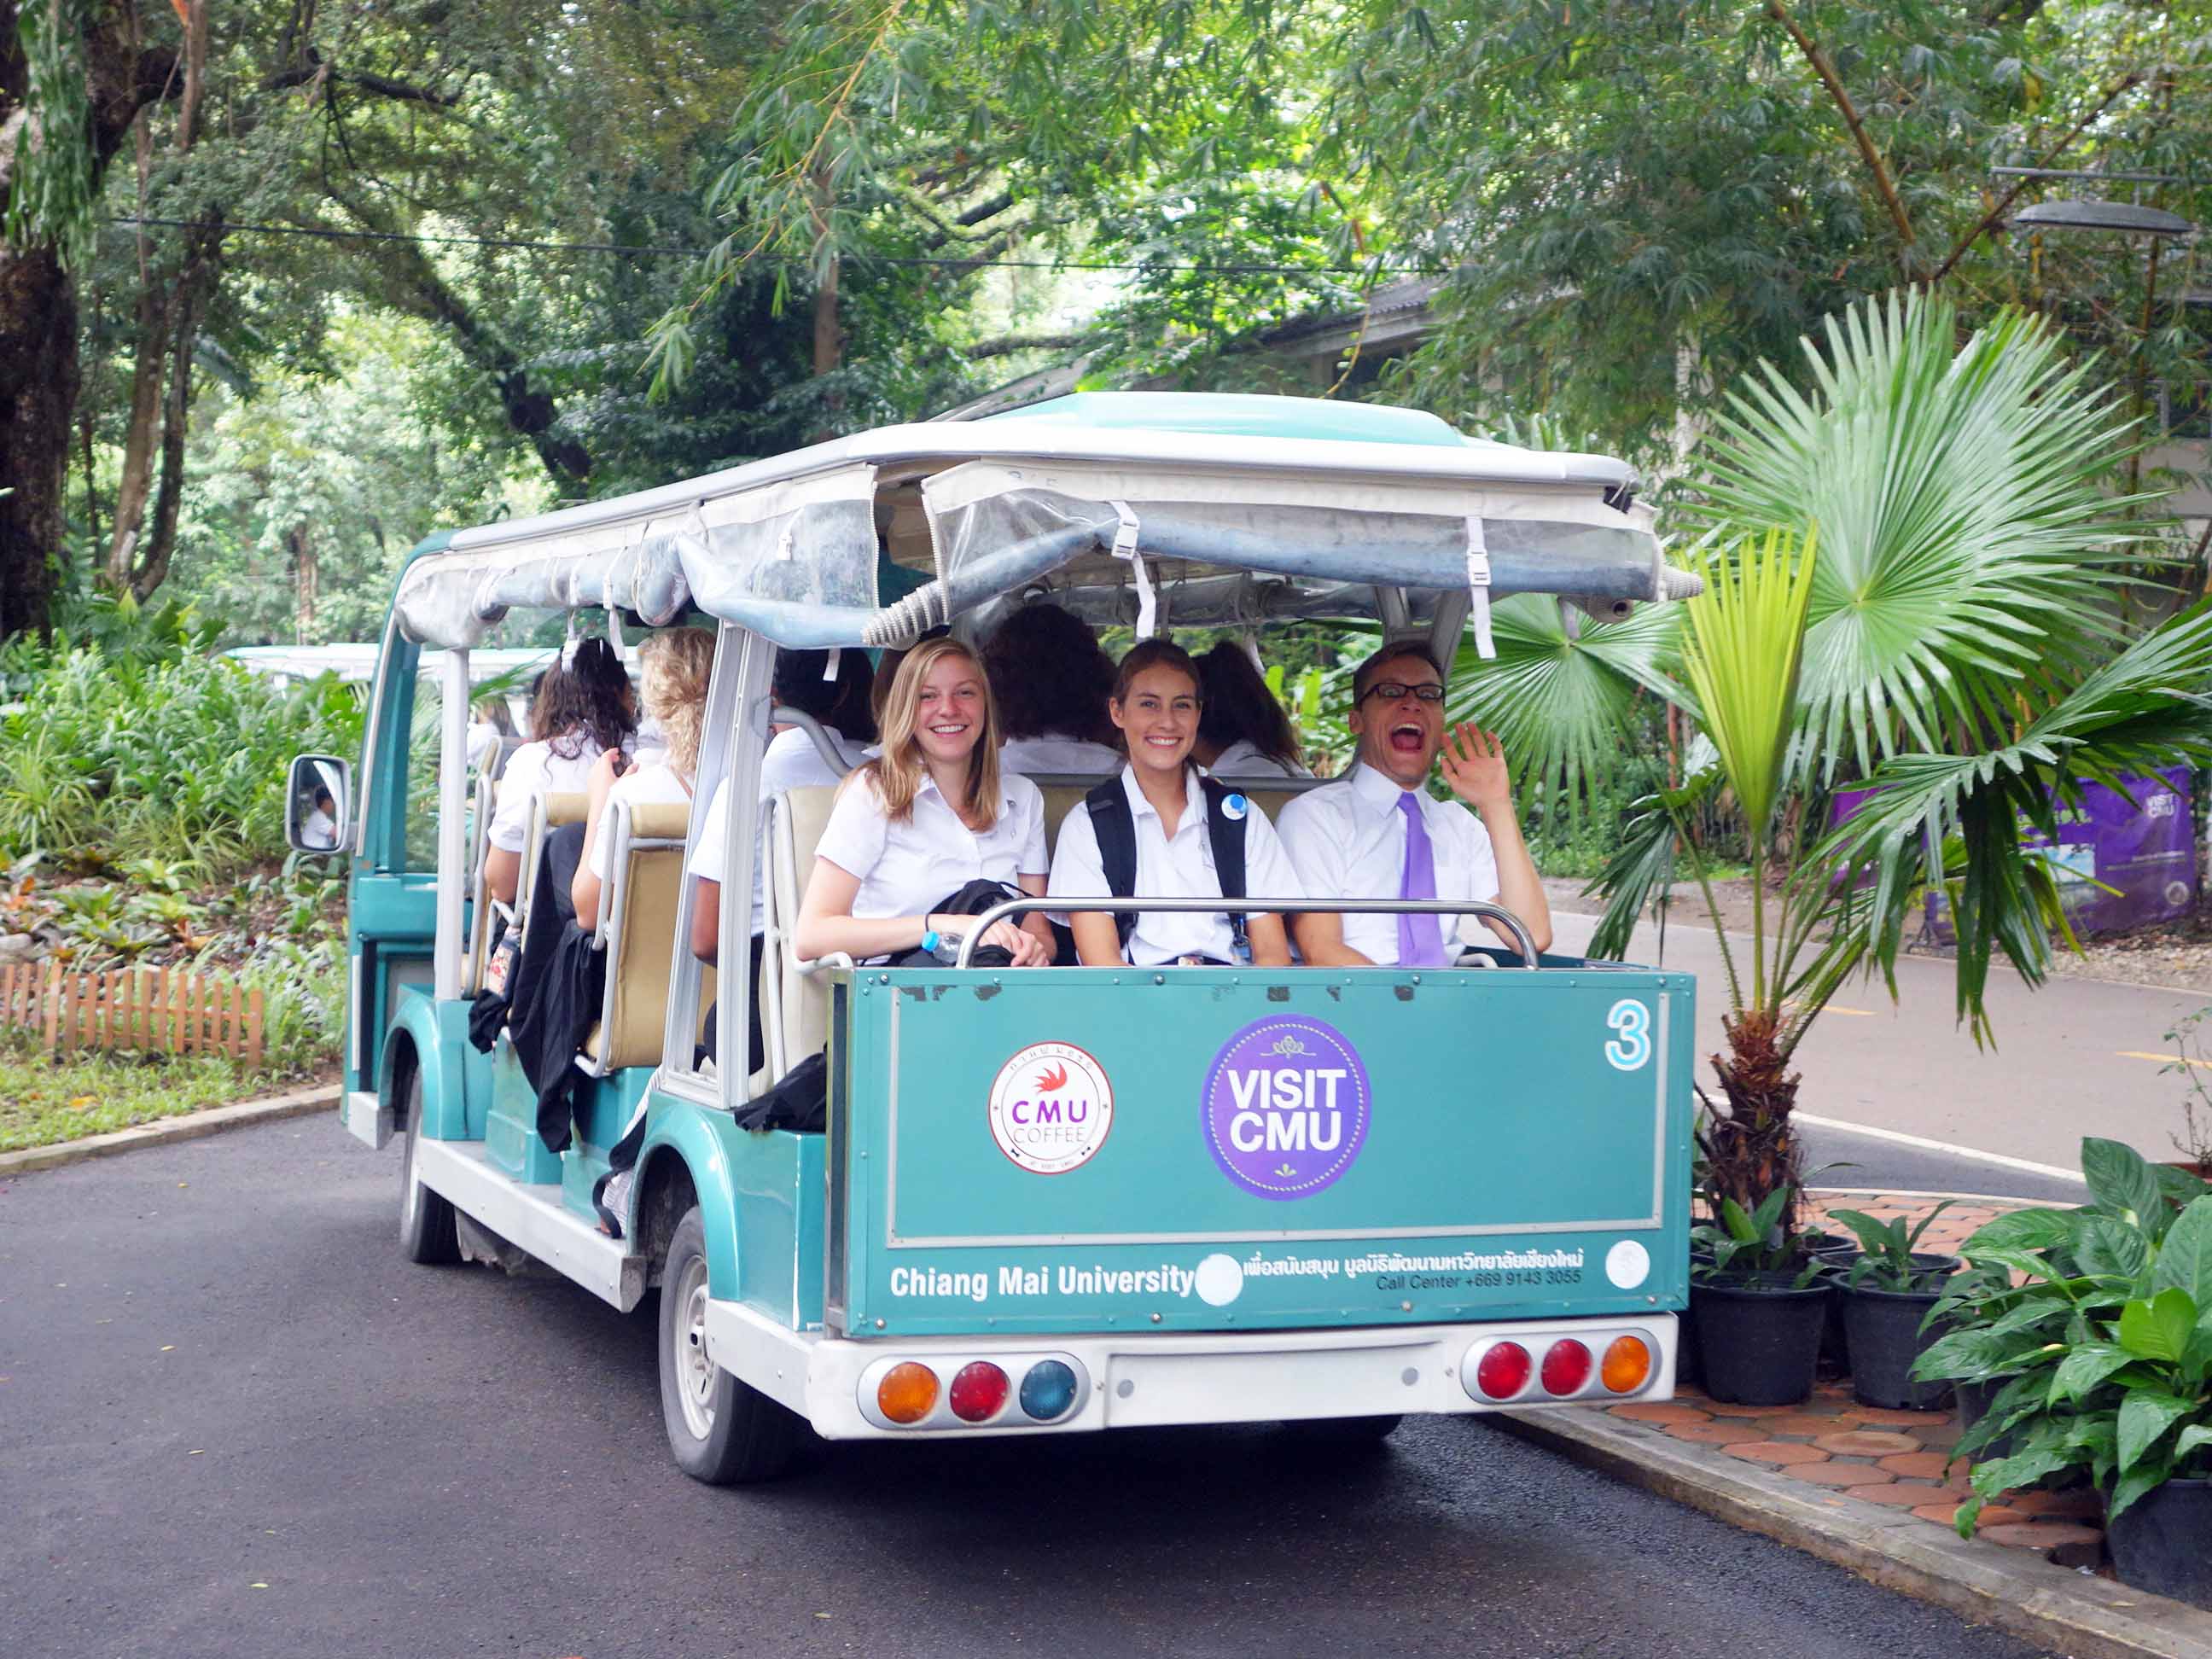 Students on the campus shuttle at Chiang Mai University (CMU) in Chiang Mai, Thailand.